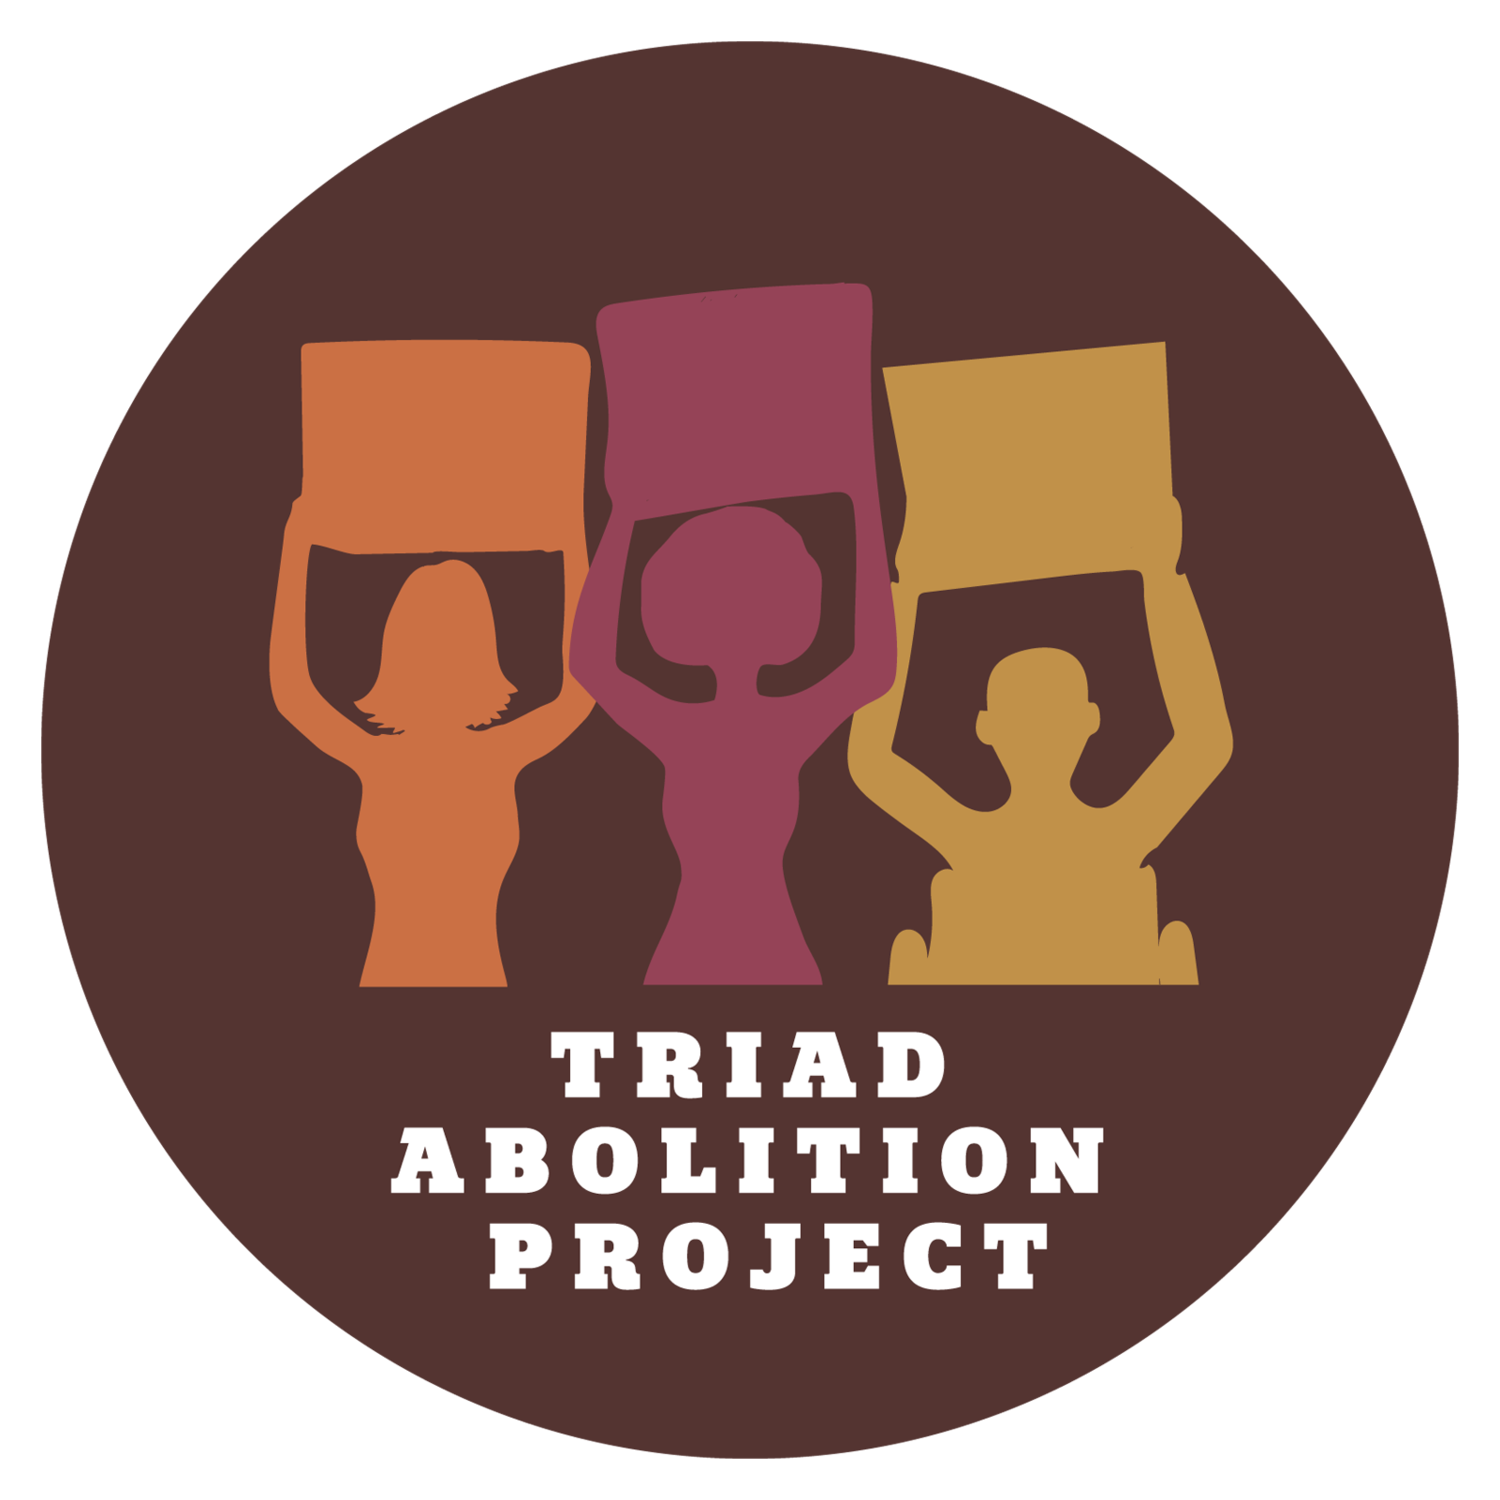 Triad Abolition Project